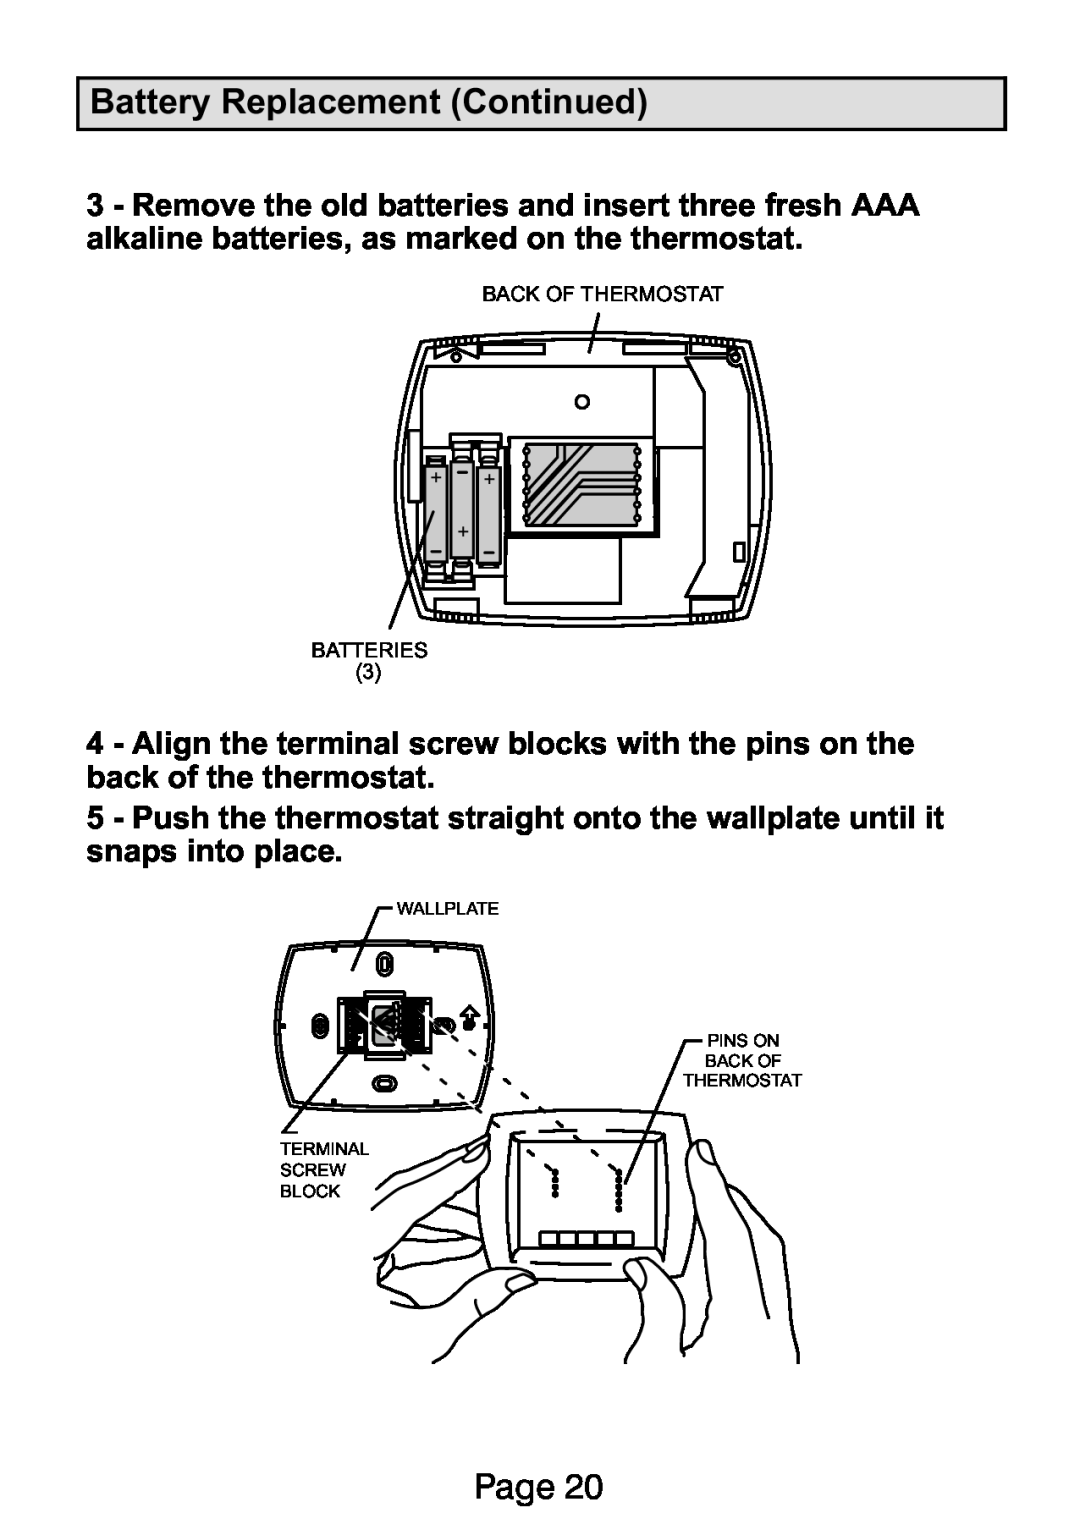 Lennox International Inc Ellite Series manual Battery Replacement Continued, Page, Back Of Thermostat, + Batteries 